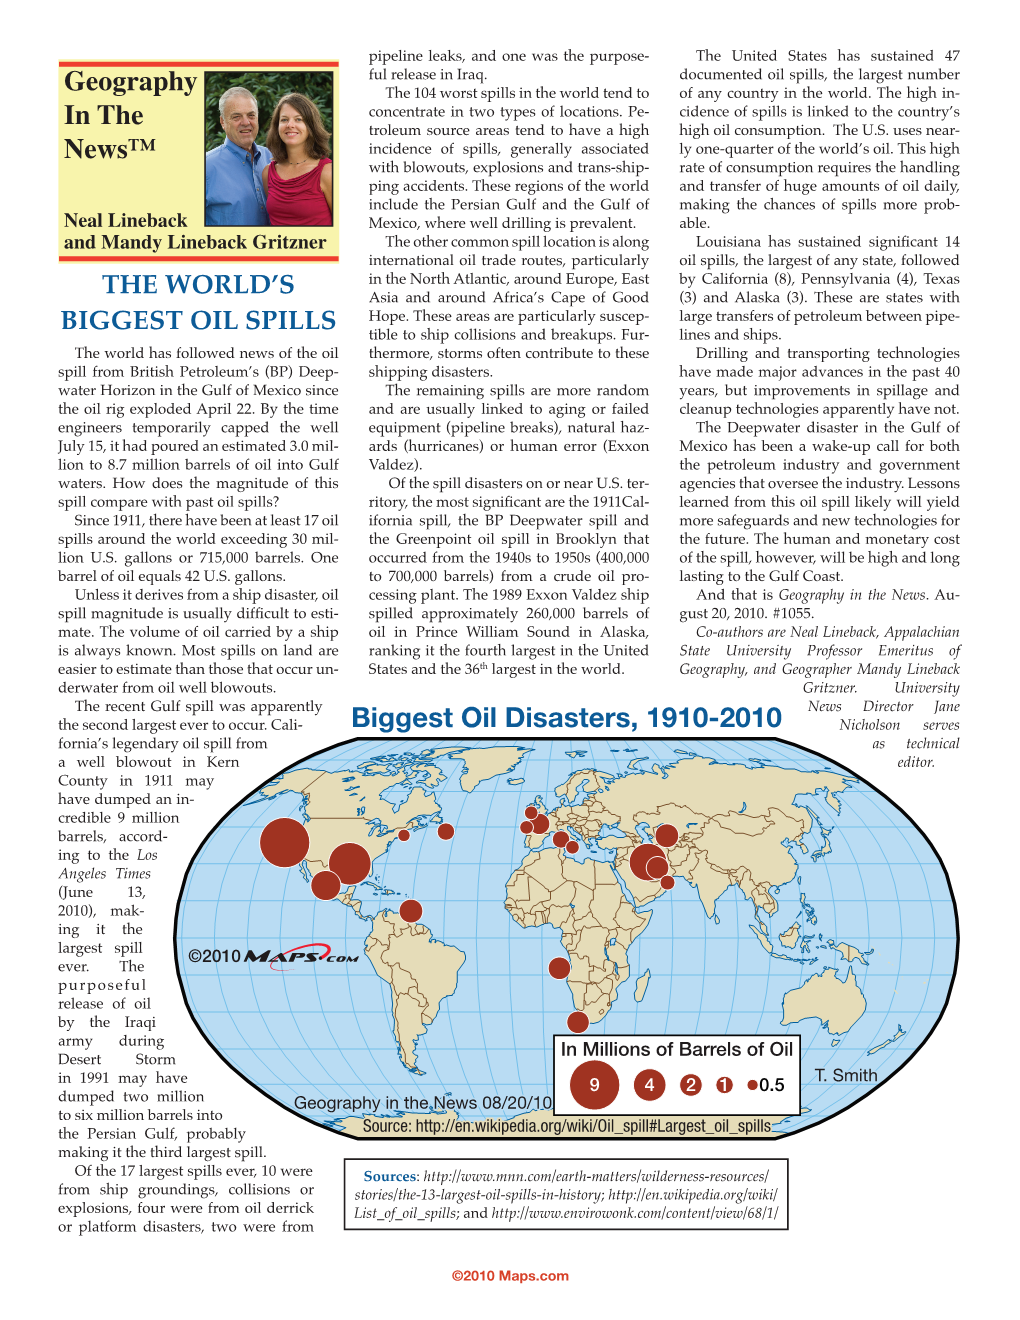 Geography in the News™ Biggest Oil Disasters, 1910-2010